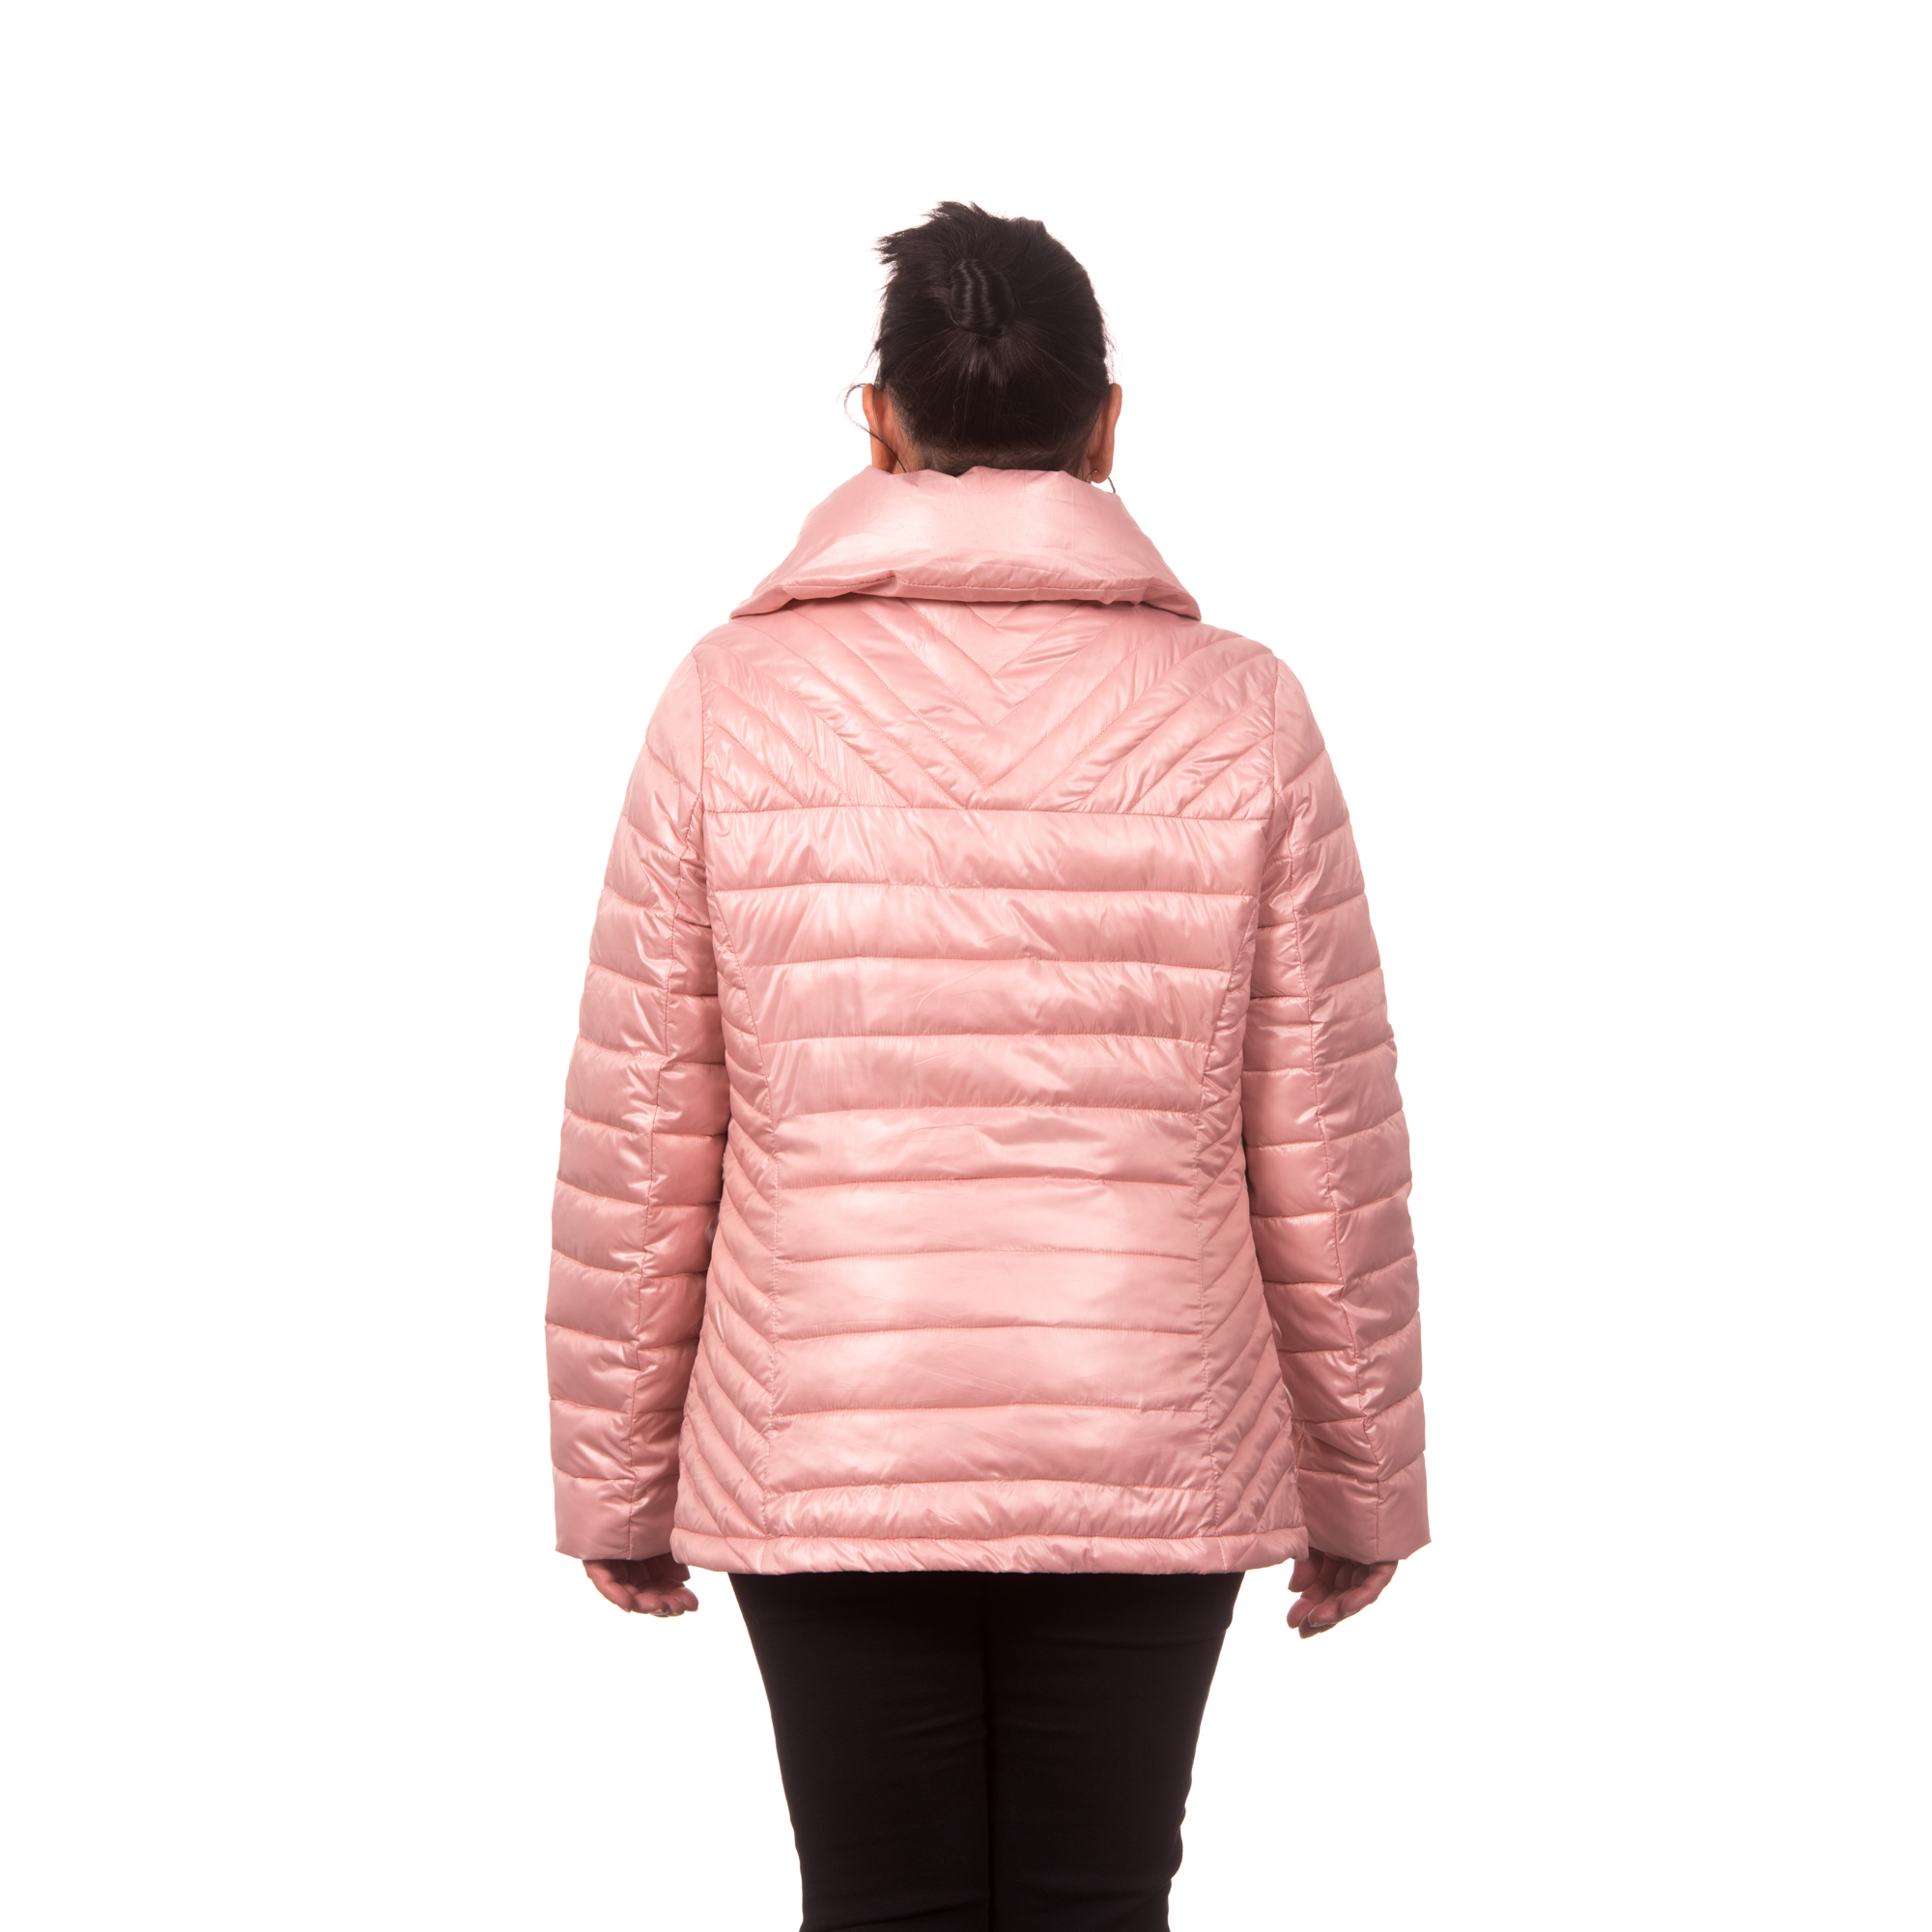 Women's Down Blend Quilted Jacket with Convertible Collar - image 2 of 2